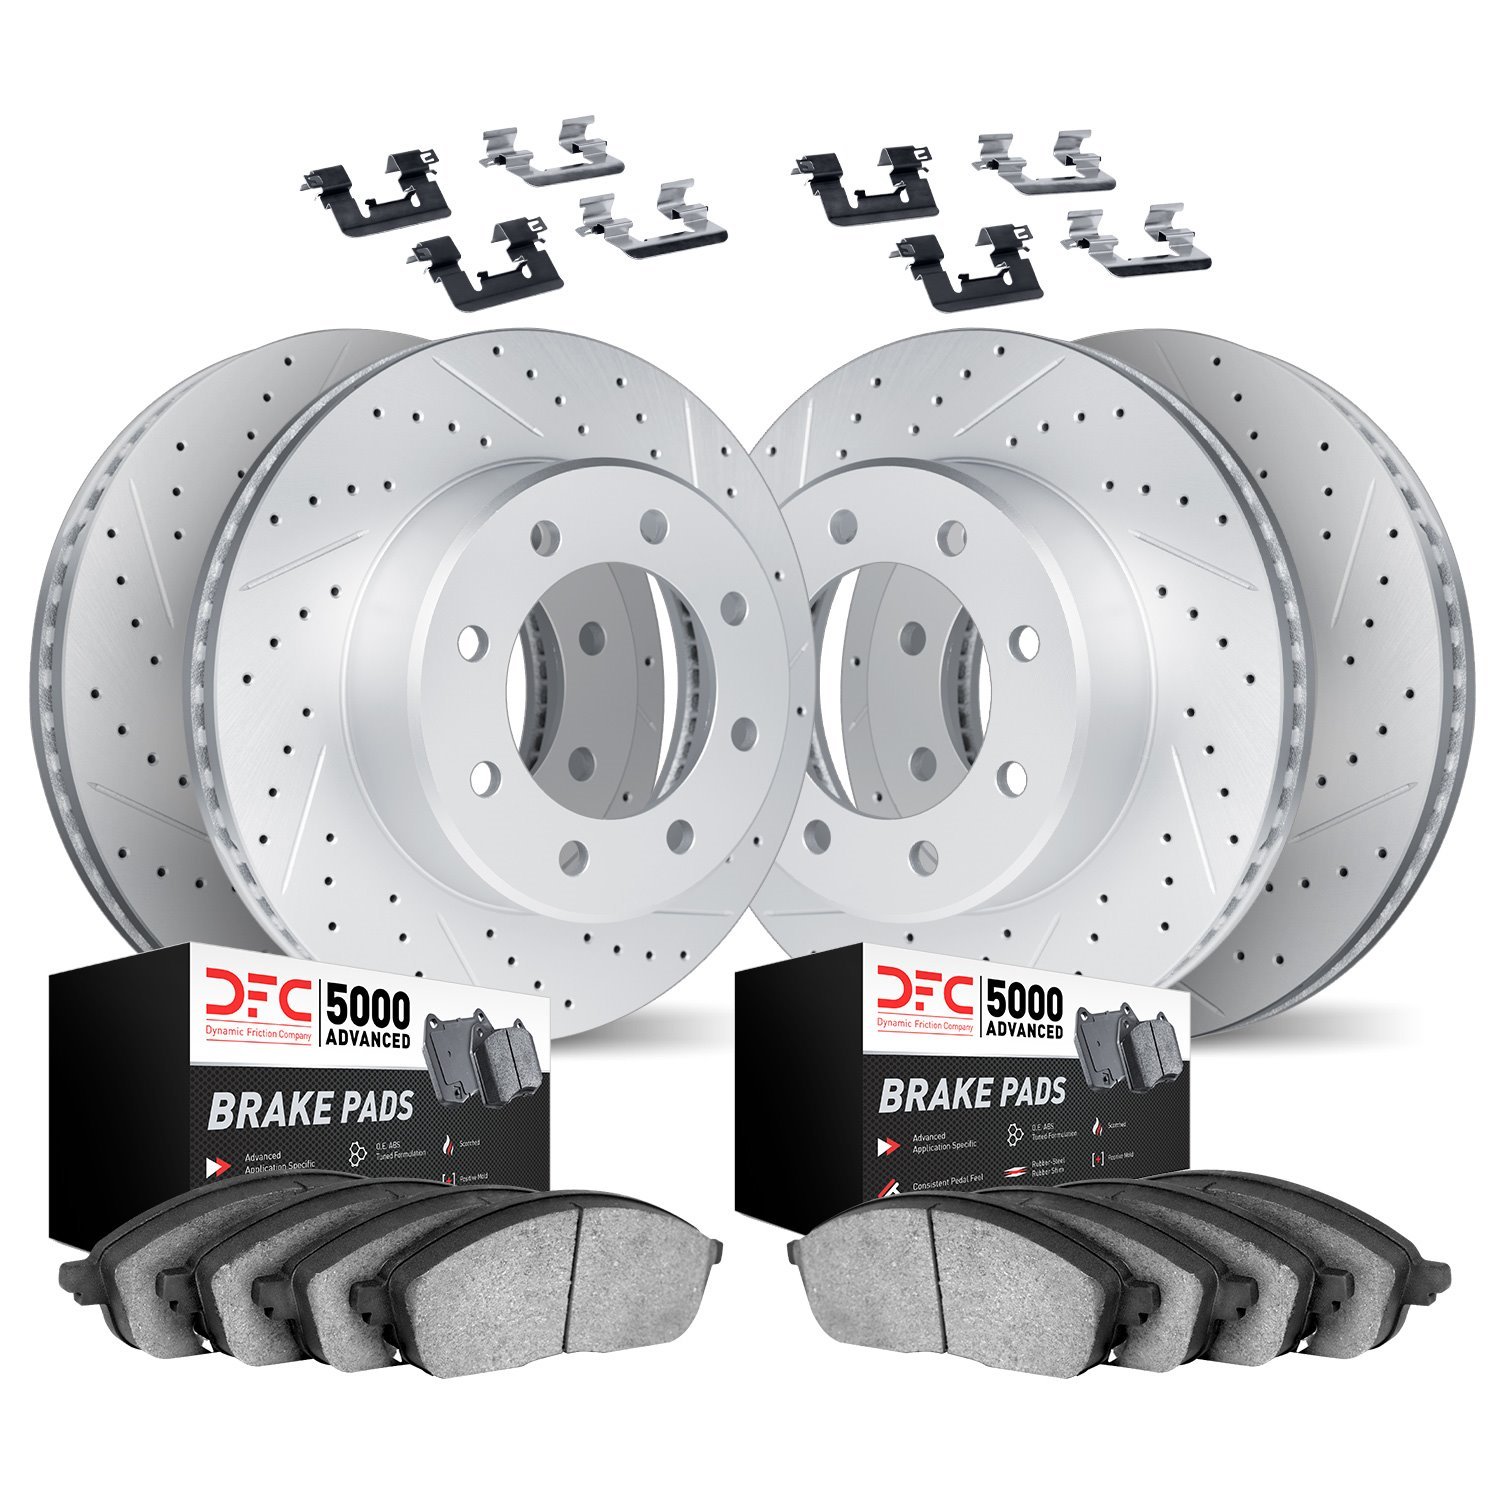 2514-48011 Geoperformance Drilled/Slotted Rotors w/5000 Advanced Brake Pads Kit & Hardware, 1999-2009 GM, Position: Front and Re